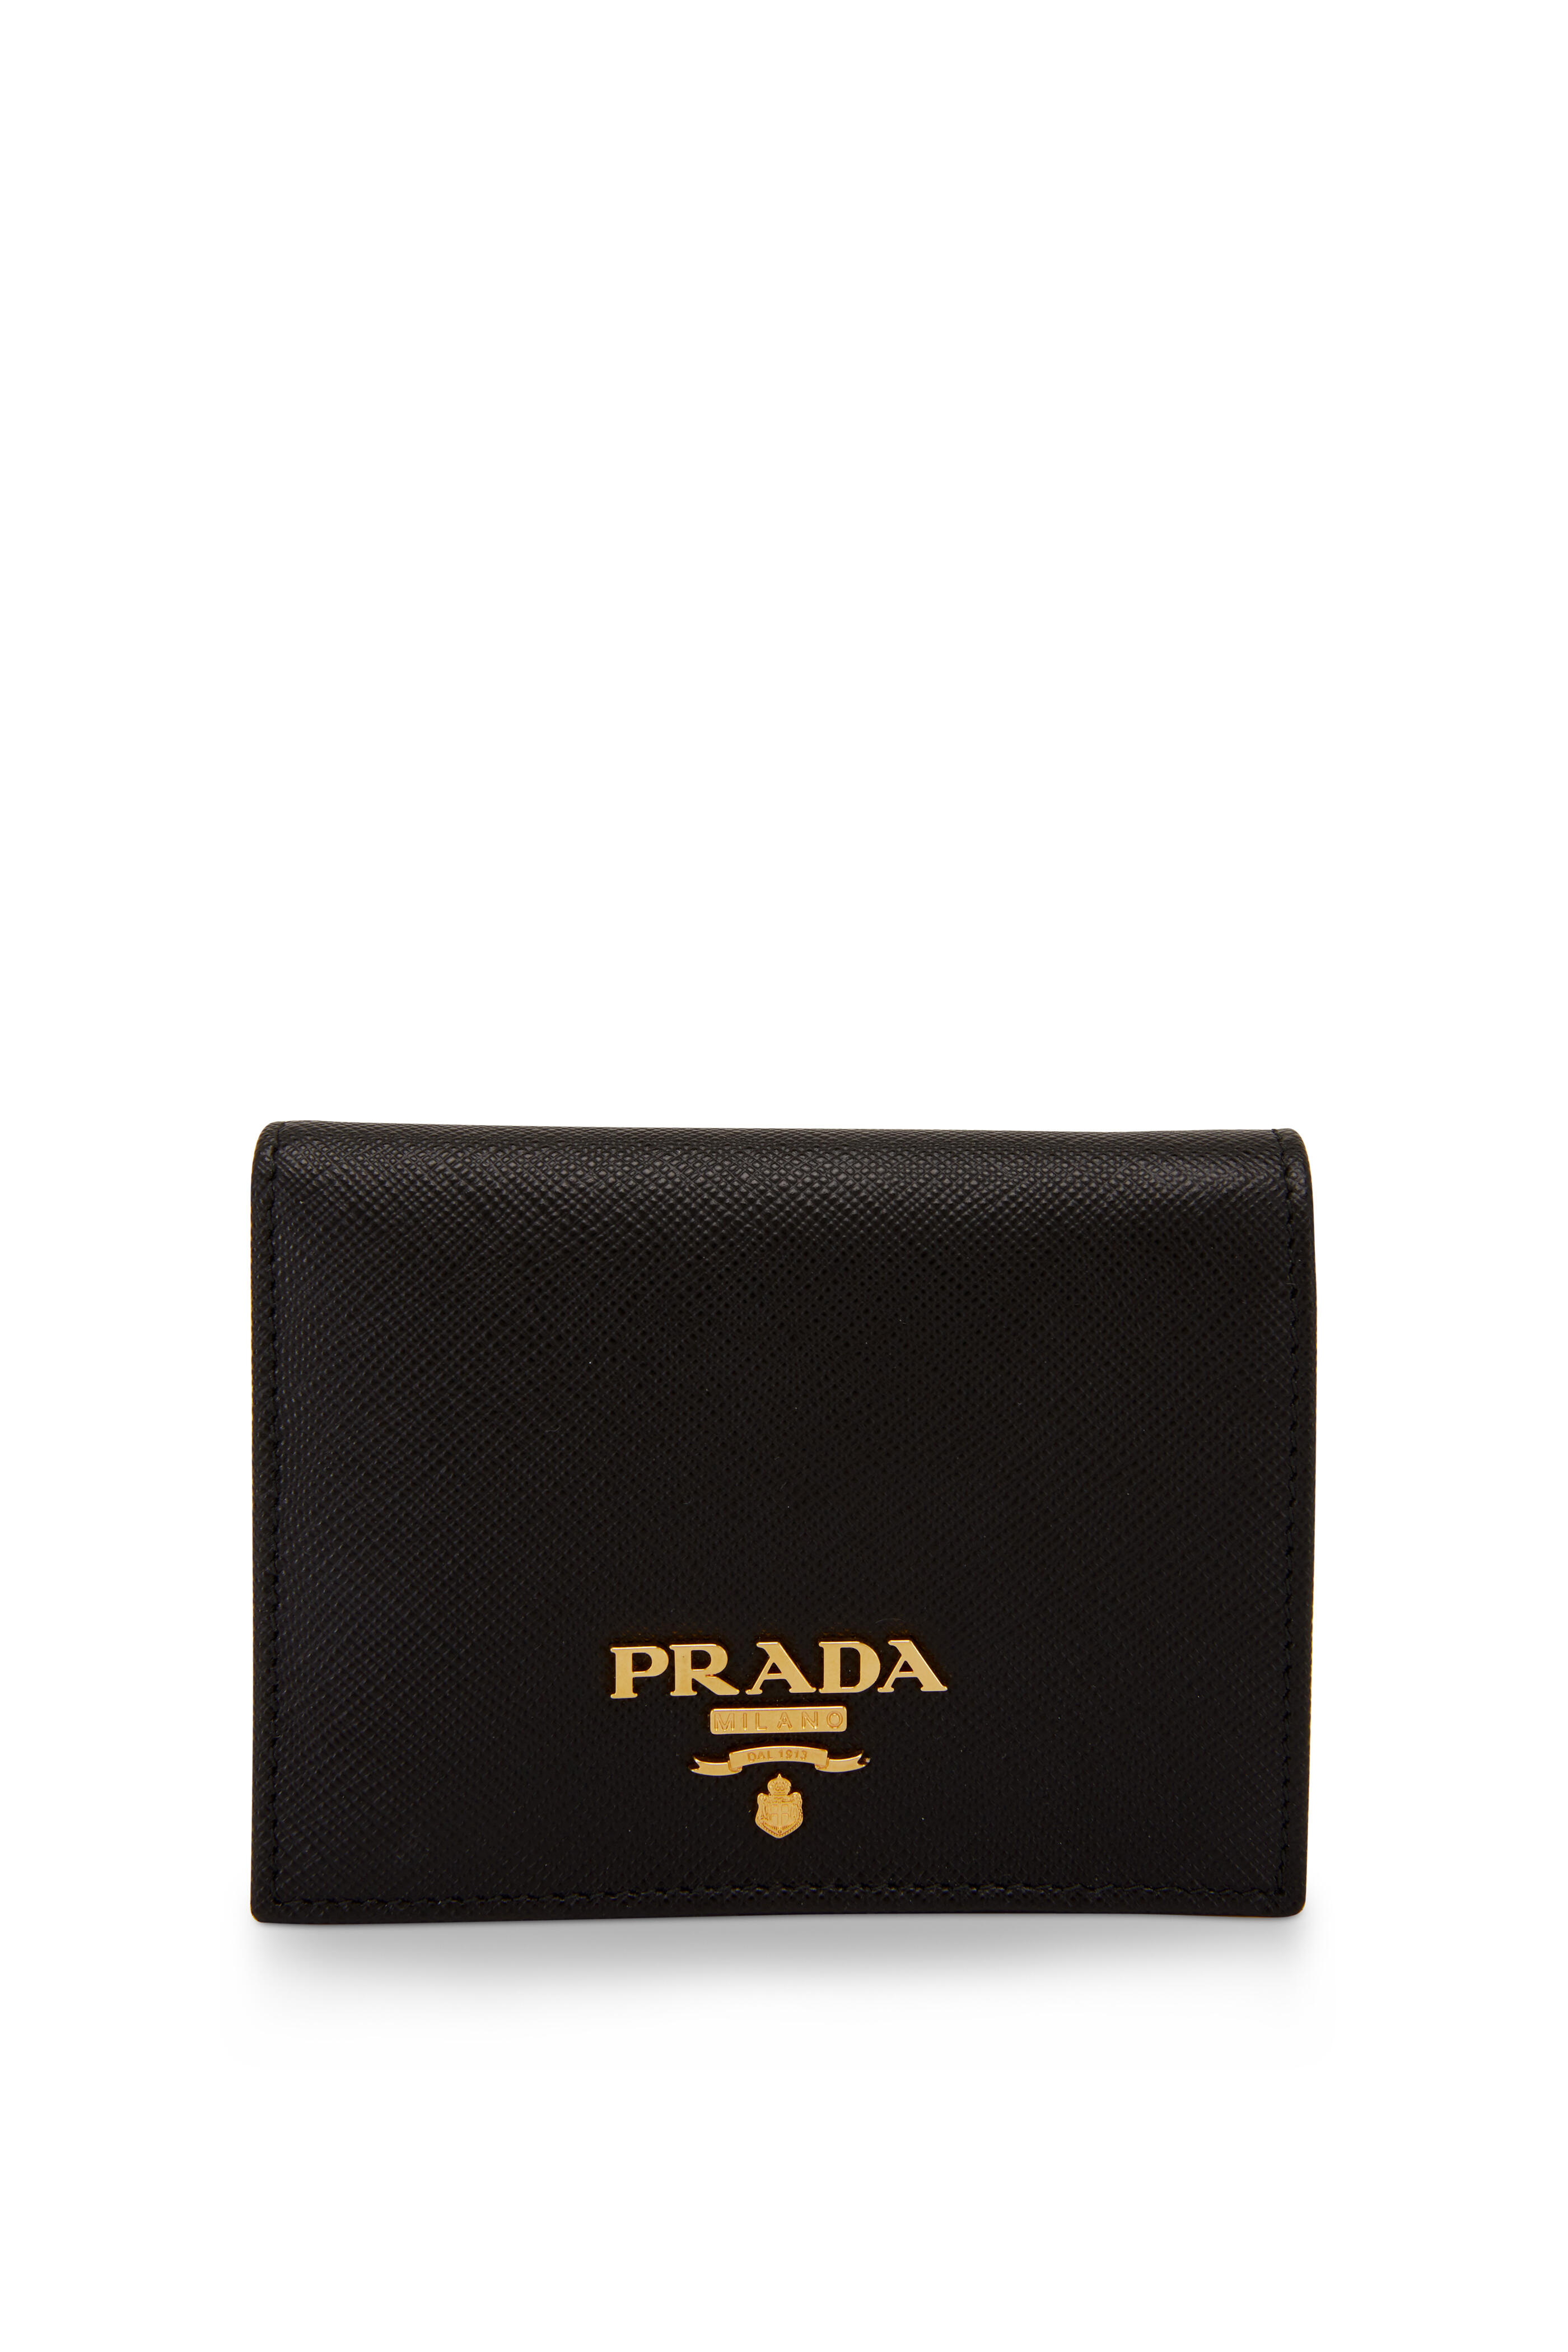 Prada Triangle Logo Strap Wallet Black in Leather with Gold-tone - US